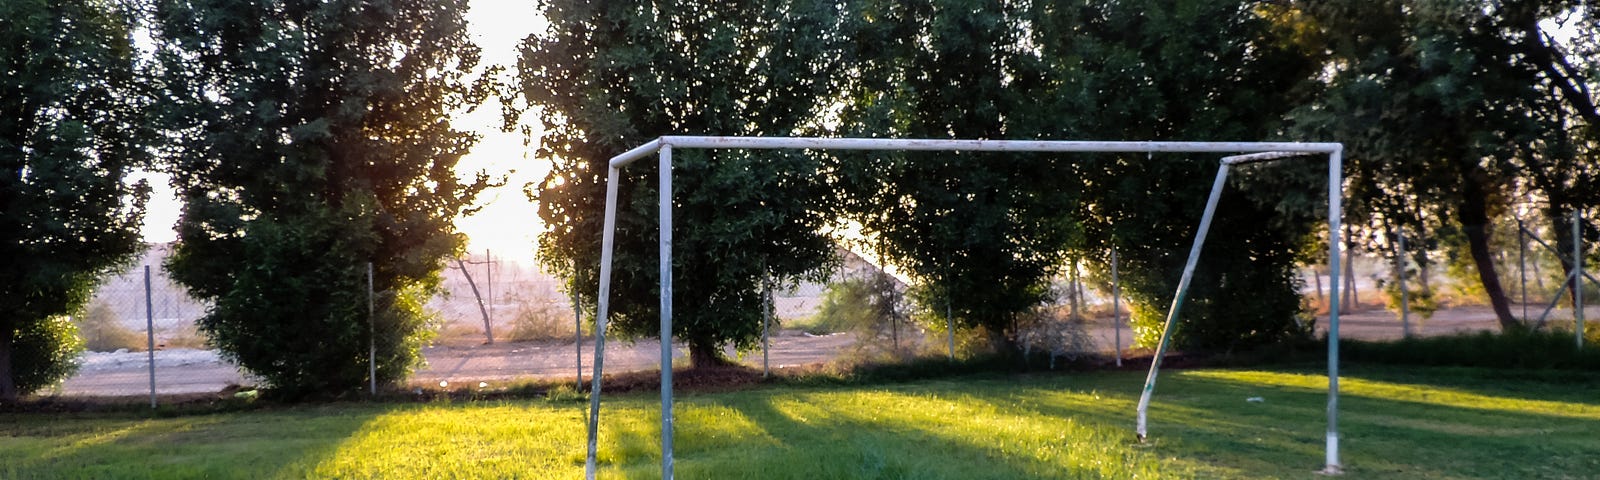 soccer goalpost standing in a grassy field with rays of sunlight